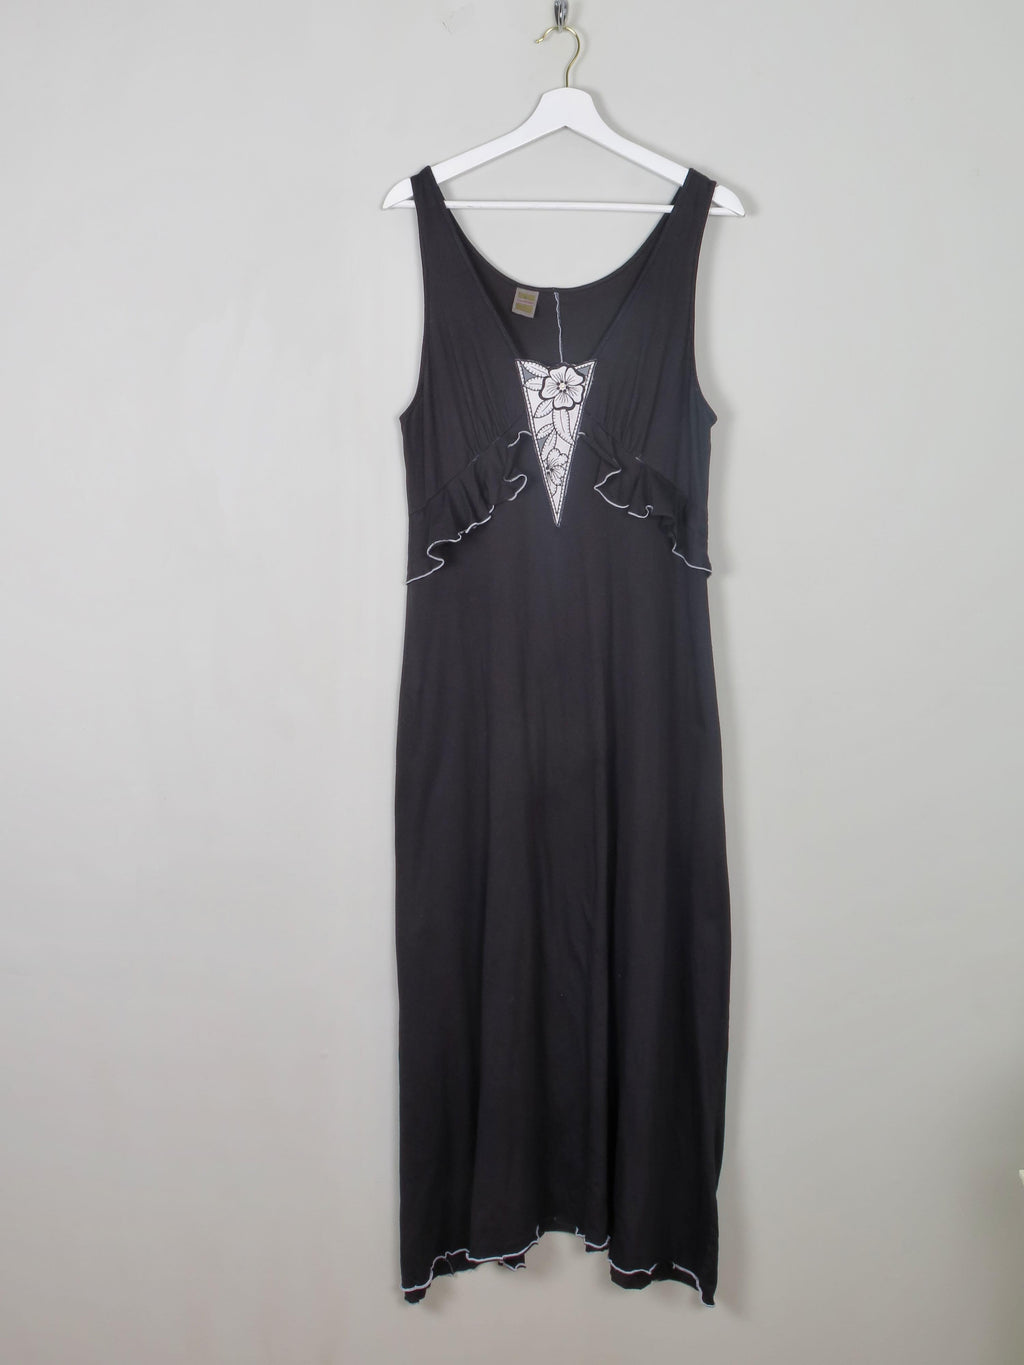 Vintage Charcoal Jersey Maxi Dress M - The Harlequin